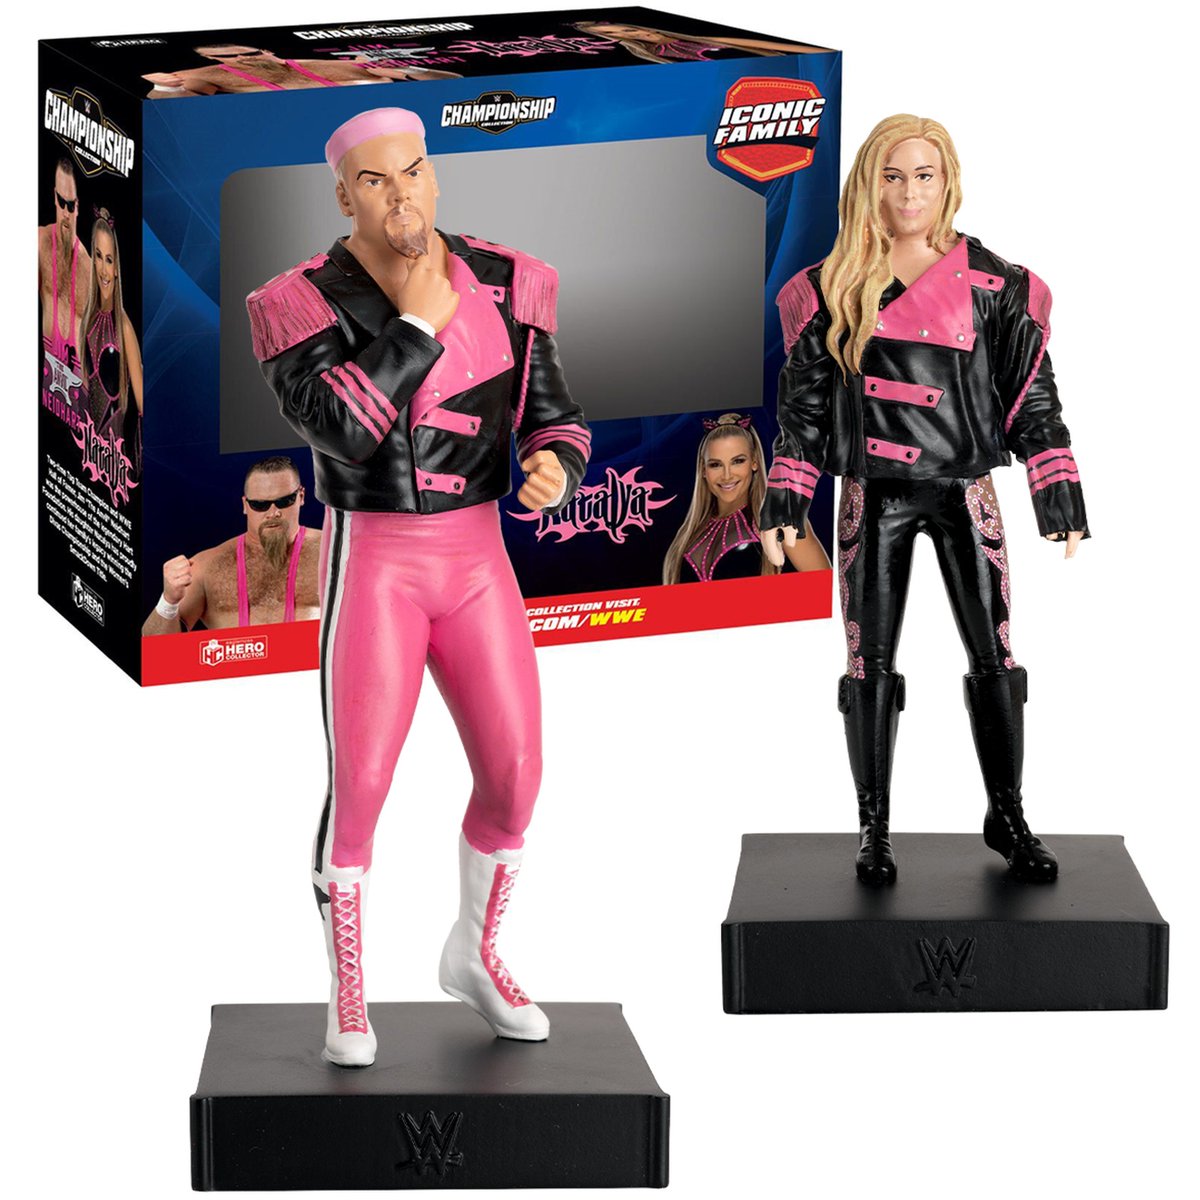 New #SummerSlam special celebrates 'The Anvil' and daughter @NatbyNature in the iconic jacket from #SummerSlam 1990. Pre-order NOW and get two mini-magazines plus lifelike poly-resin statues! Order: ms.spr.ly/6018n04kI